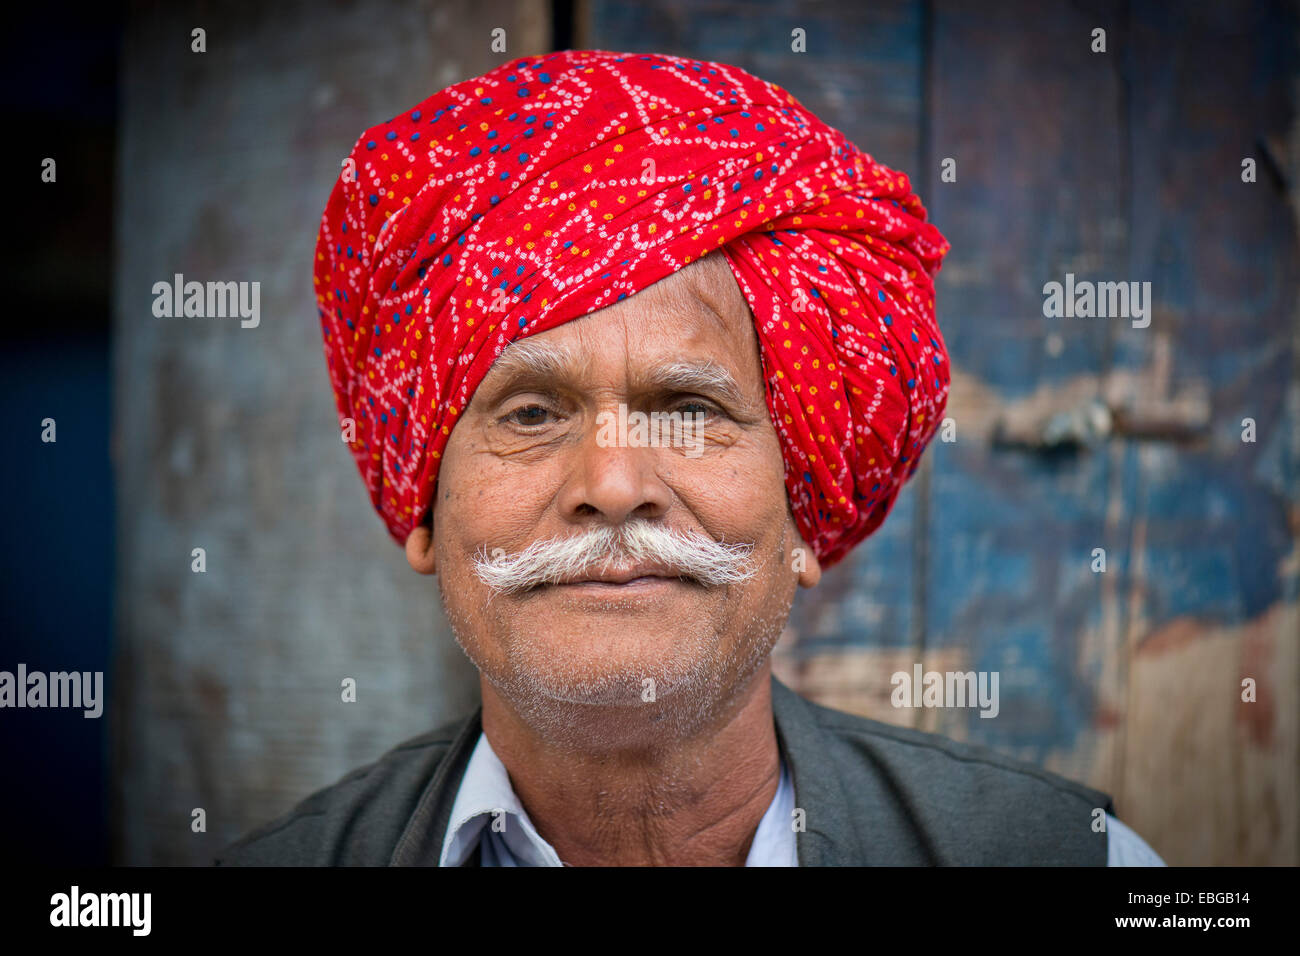 Indian man with a red turban, Bassi, Rajasthan, India Stock Photo